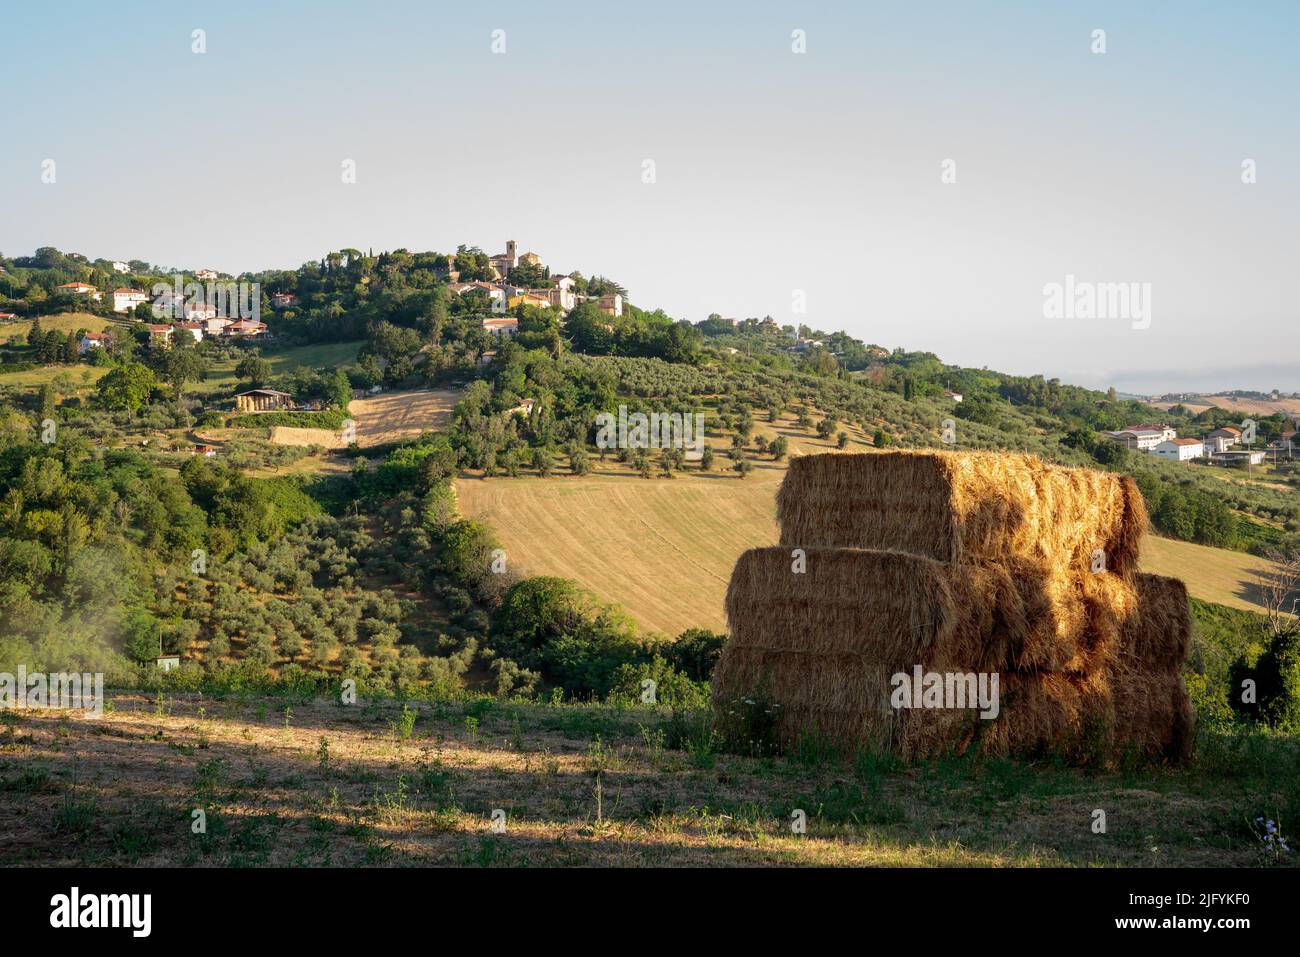 A view of Montegridolfo, an antique village in the Emilia-Romagna region of Italy. Cultivated fields on the hillside, under the first rays of sunlight Stock Photo